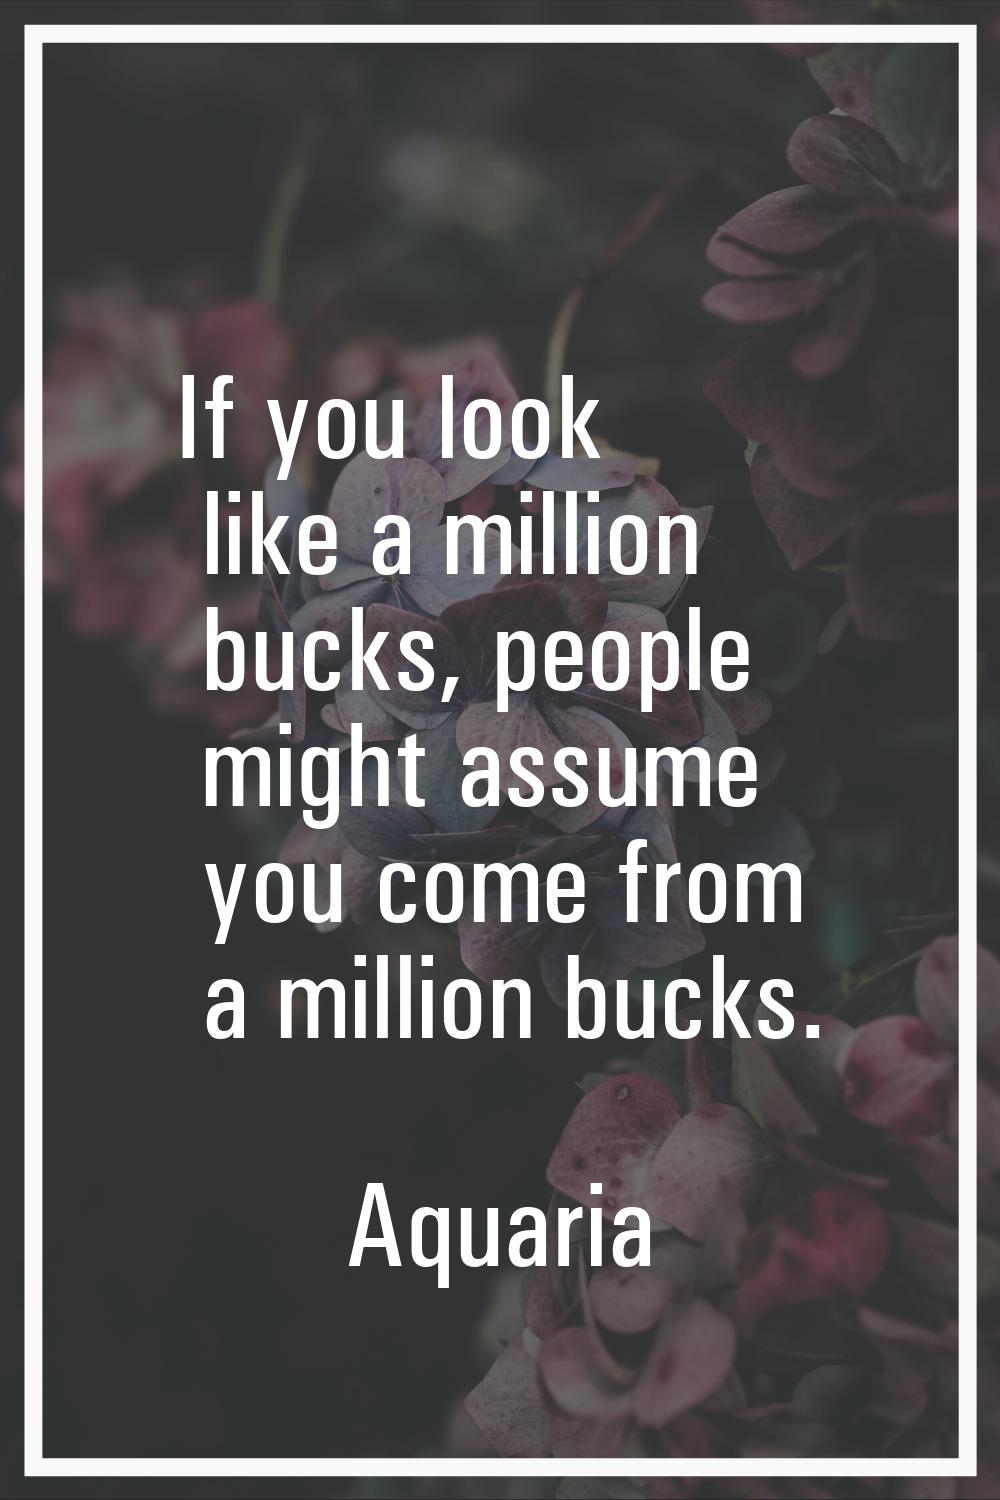 If you look like a million bucks, people might assume you come from a million bucks.